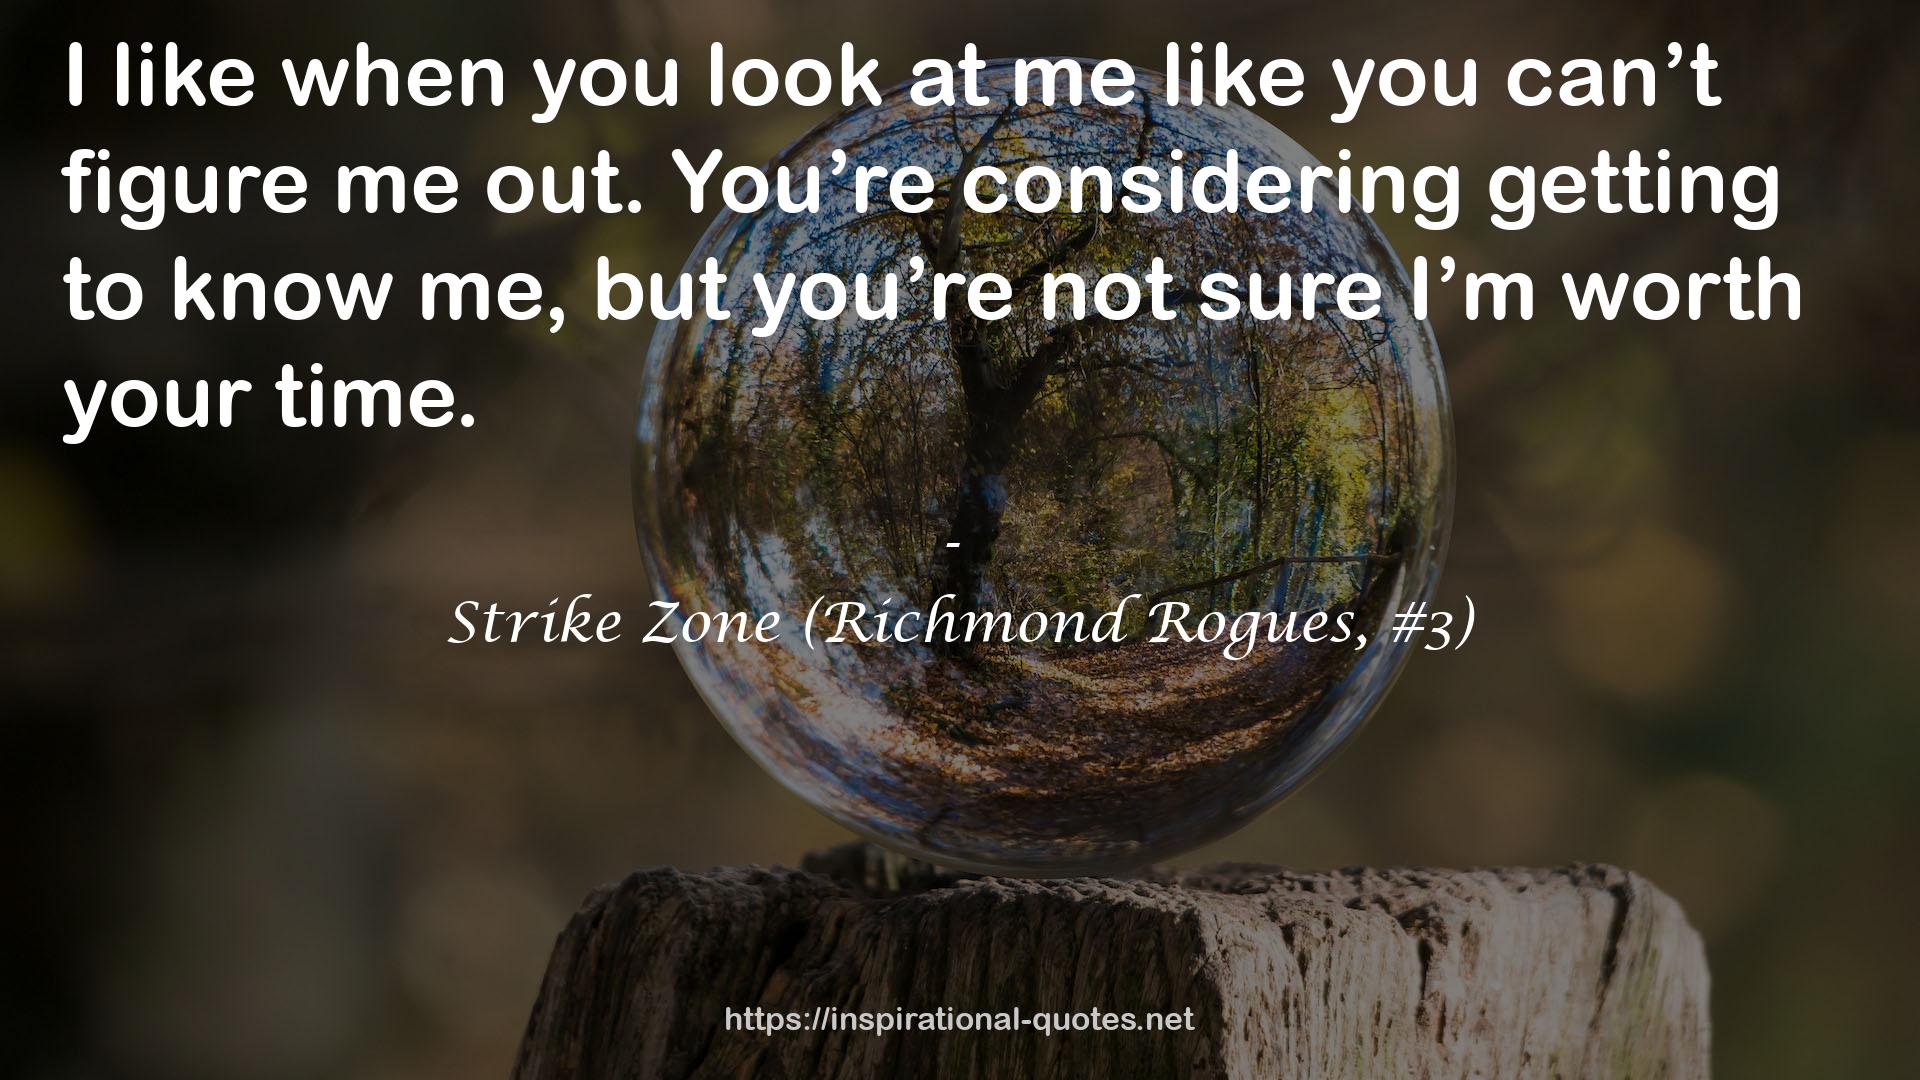 Strike Zone (Richmond Rogues, #3) QUOTES